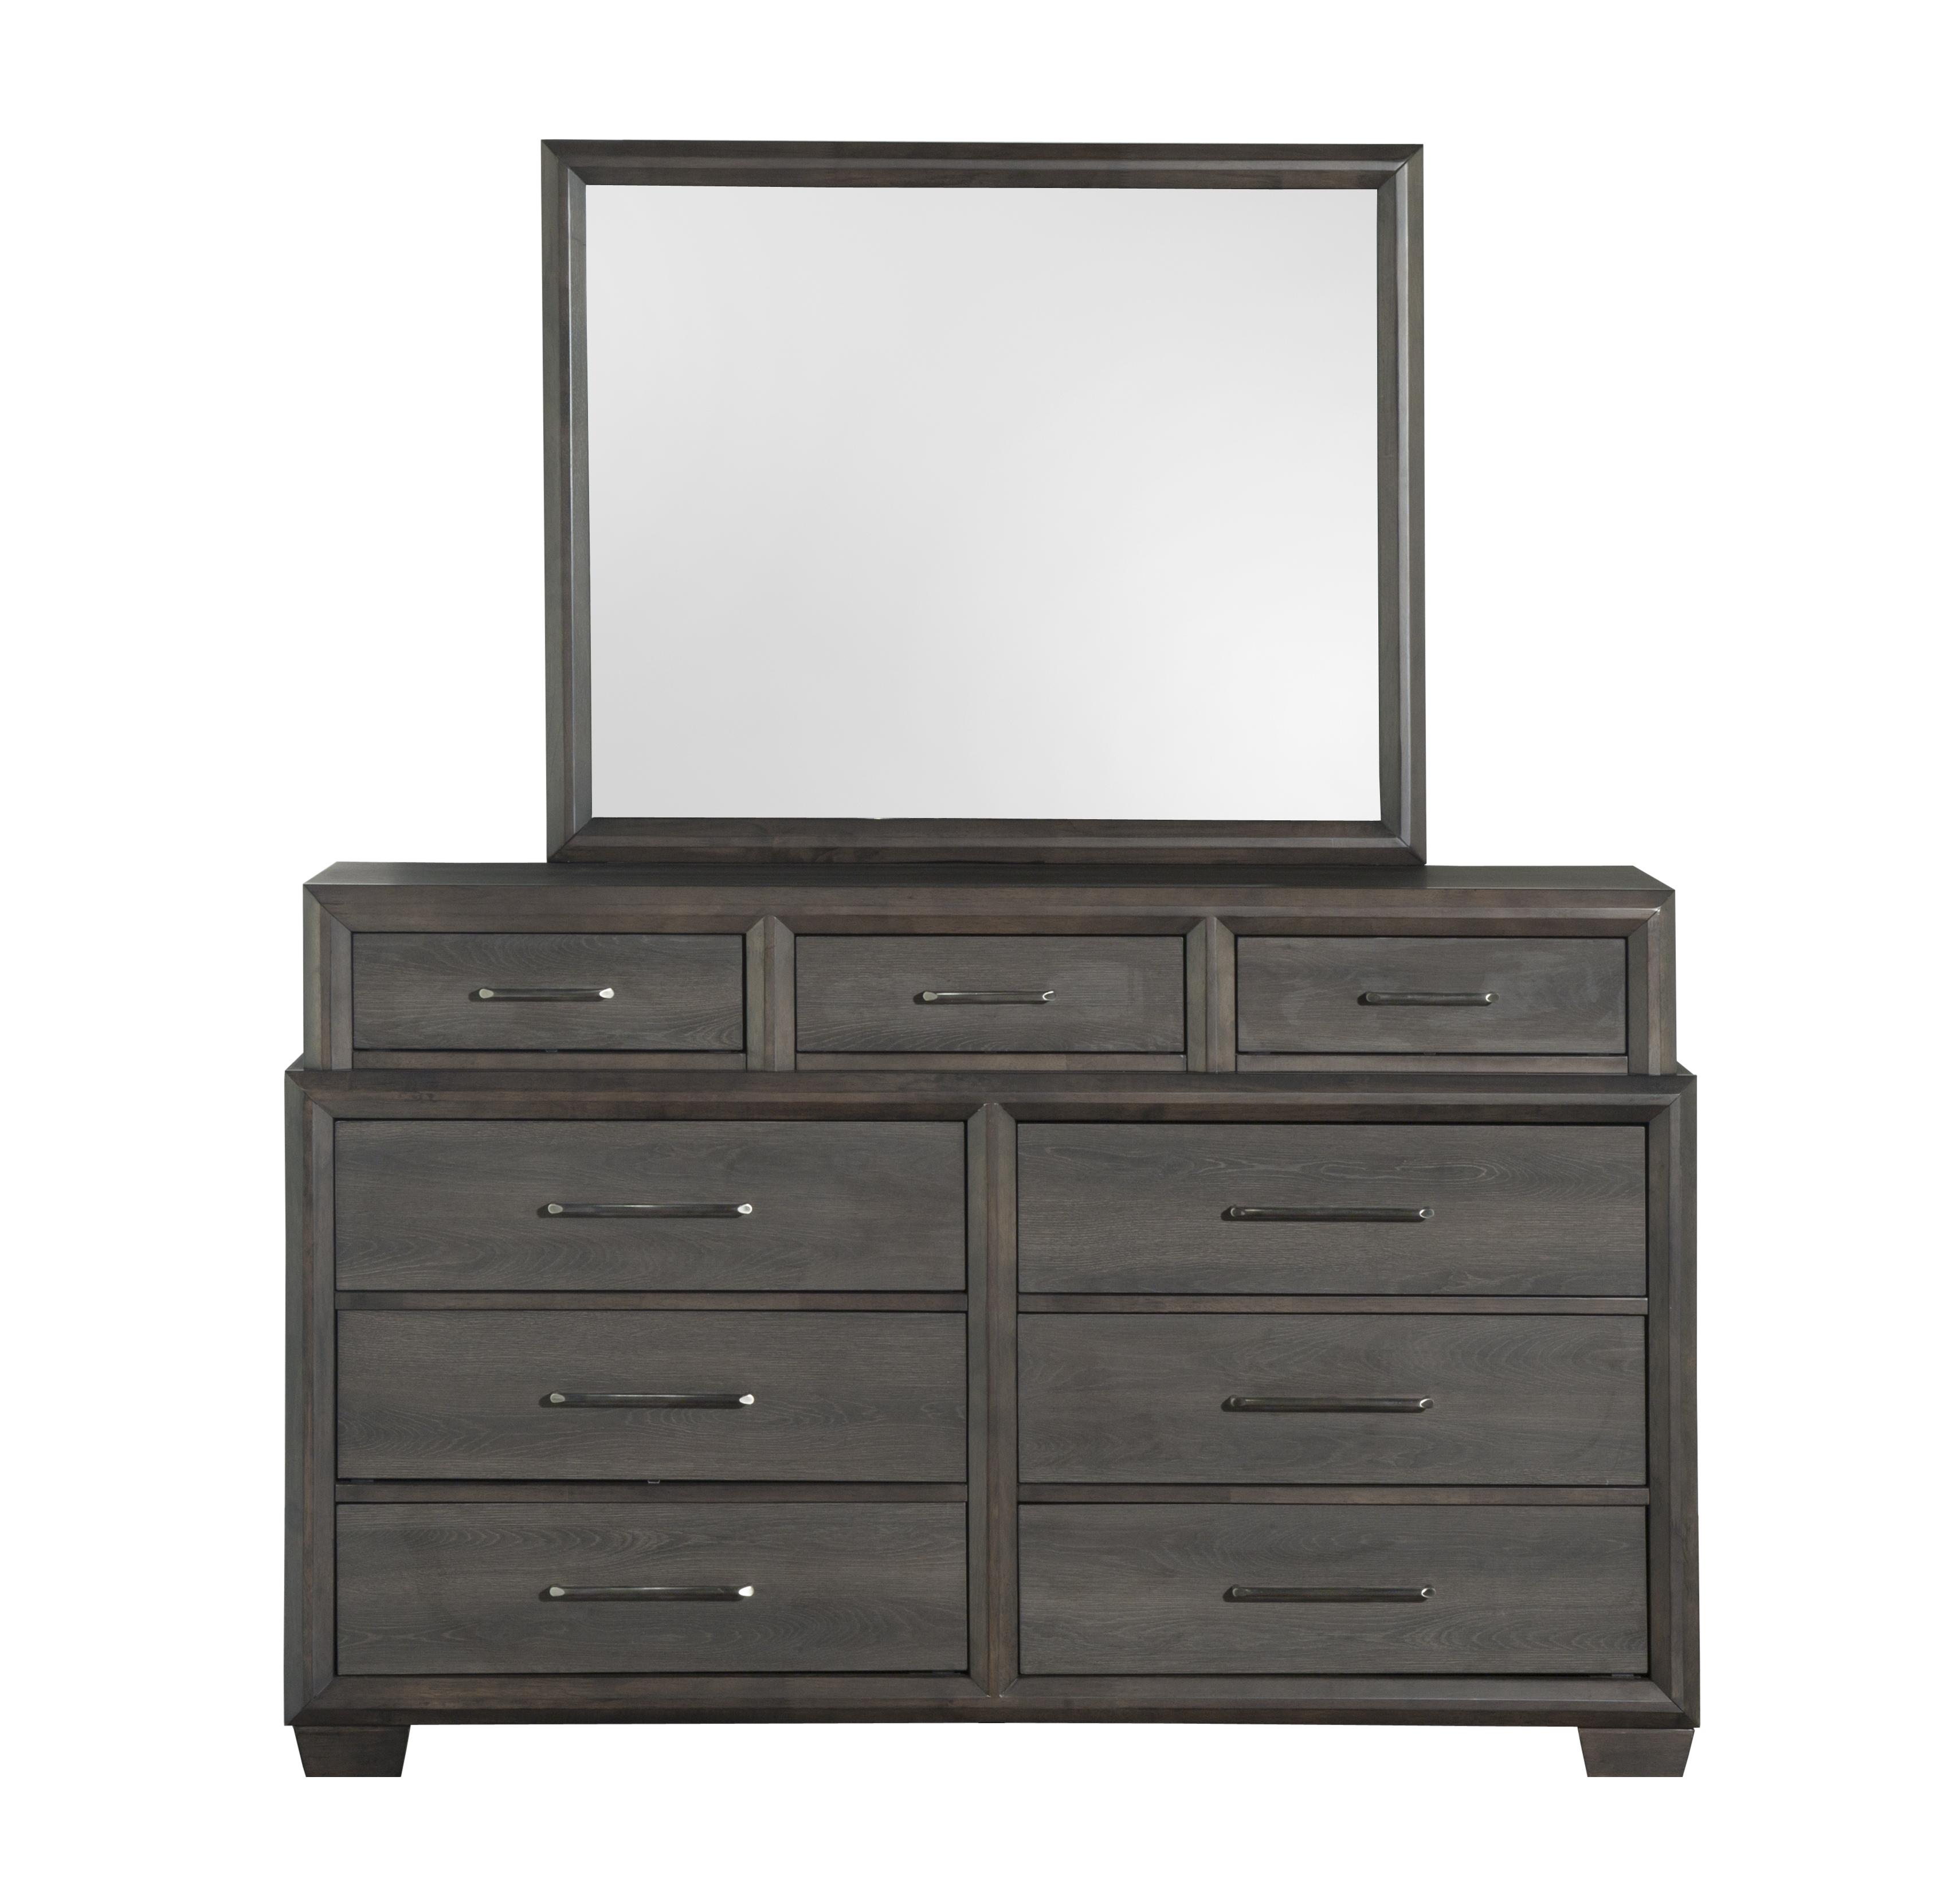 Contemporary, Modern Dresser With Mirror Lombard 1913-130-2pcs in Gray, Brown 